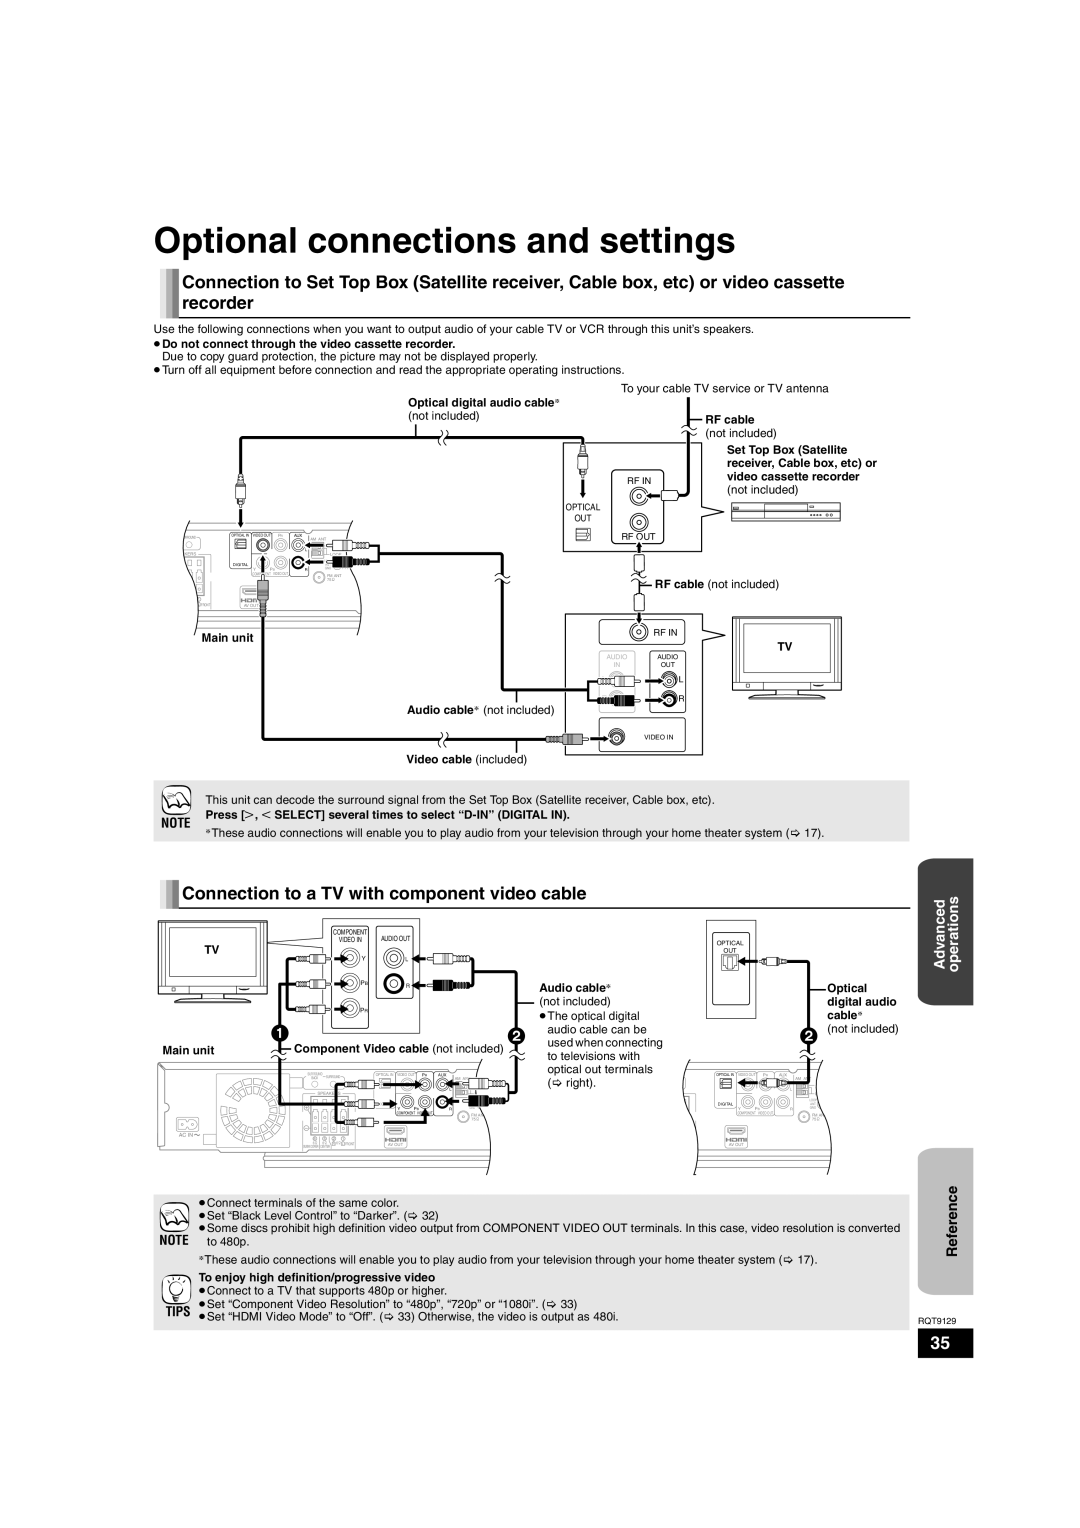 Panasonic SC-BT100 Optional connections and settings, Connection to a TV with component video cable, Audio cable§, right 